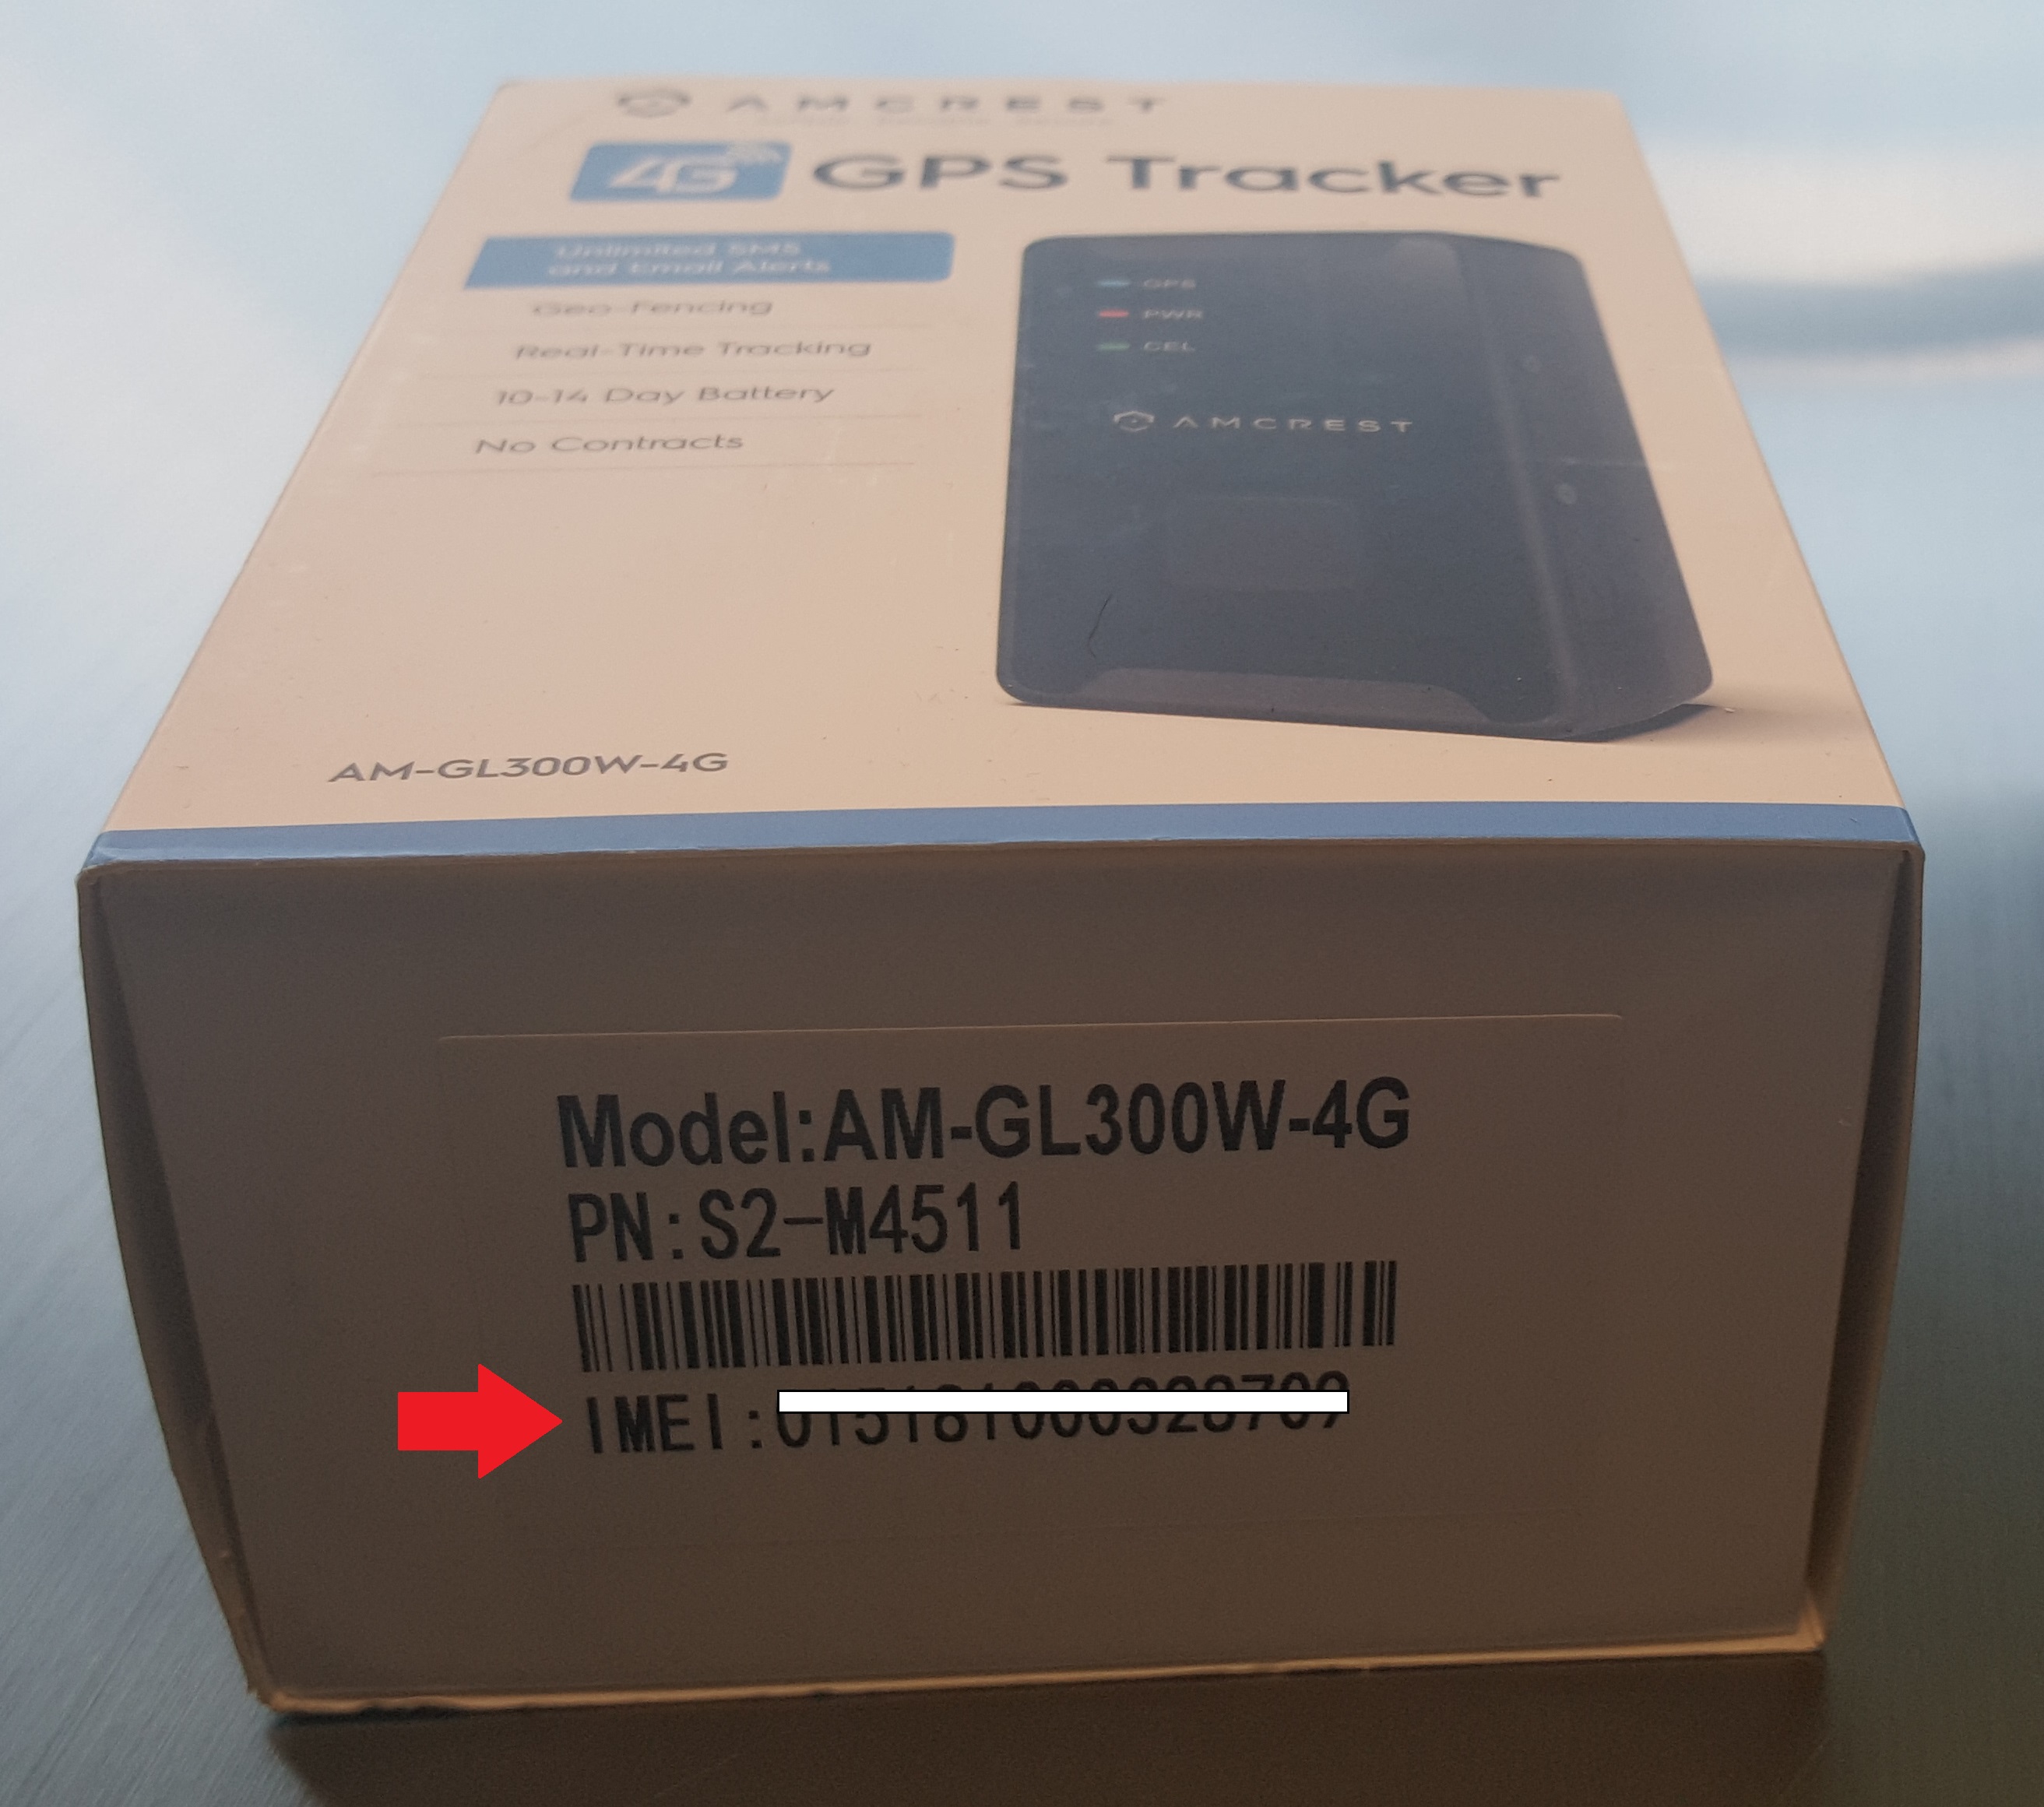 Vaccinere Ellers Mediator How to Find the IMEI Number On Amcrest GPS Tracker – Amcrest